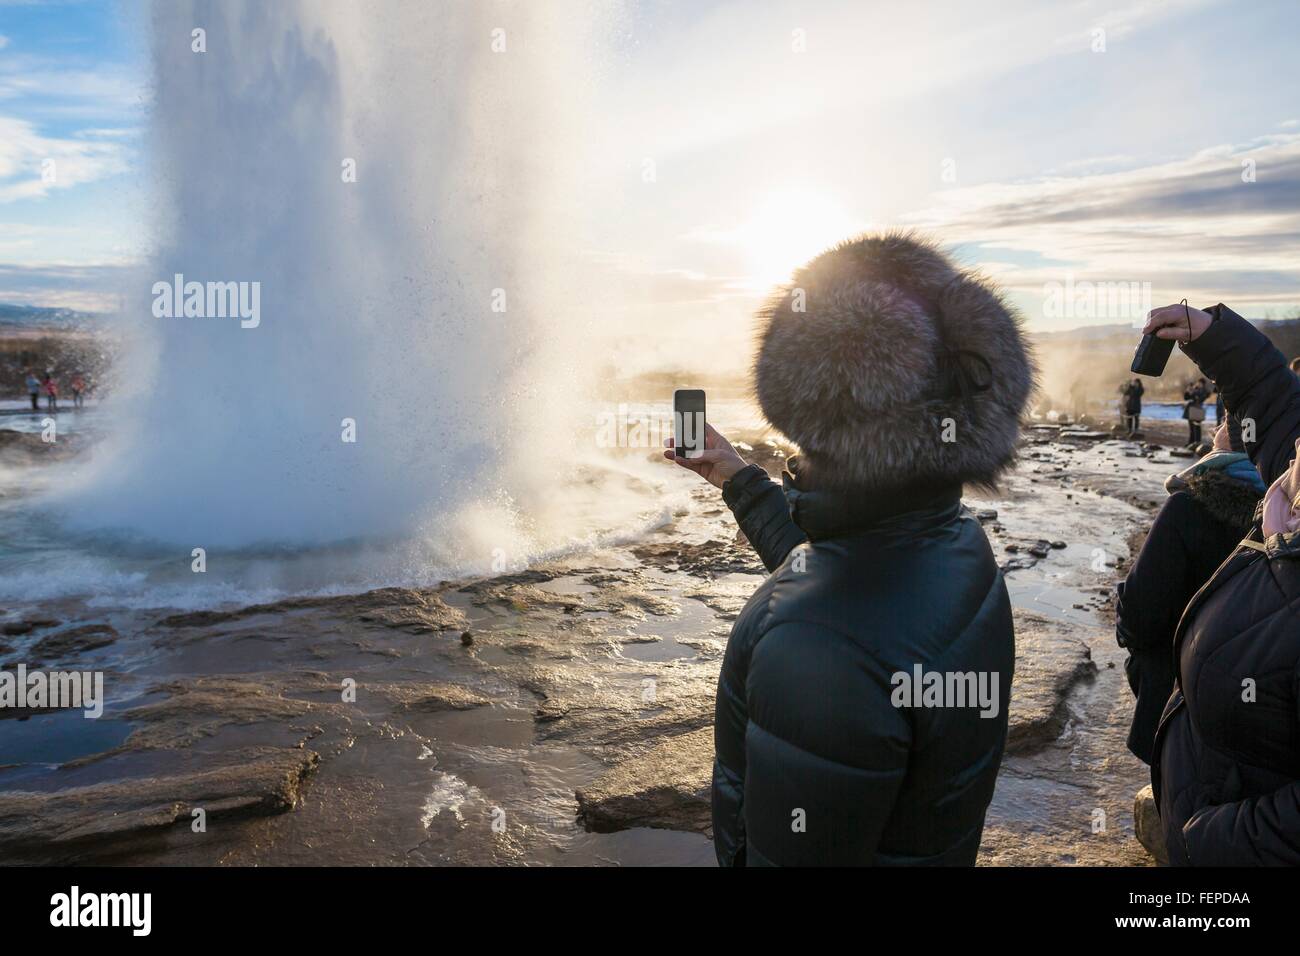 Woman photographing The Great Geysir, a geyser in the Haukadalur valley on the slopes of Laugarfjall hill, South West Iceland Stock Photo